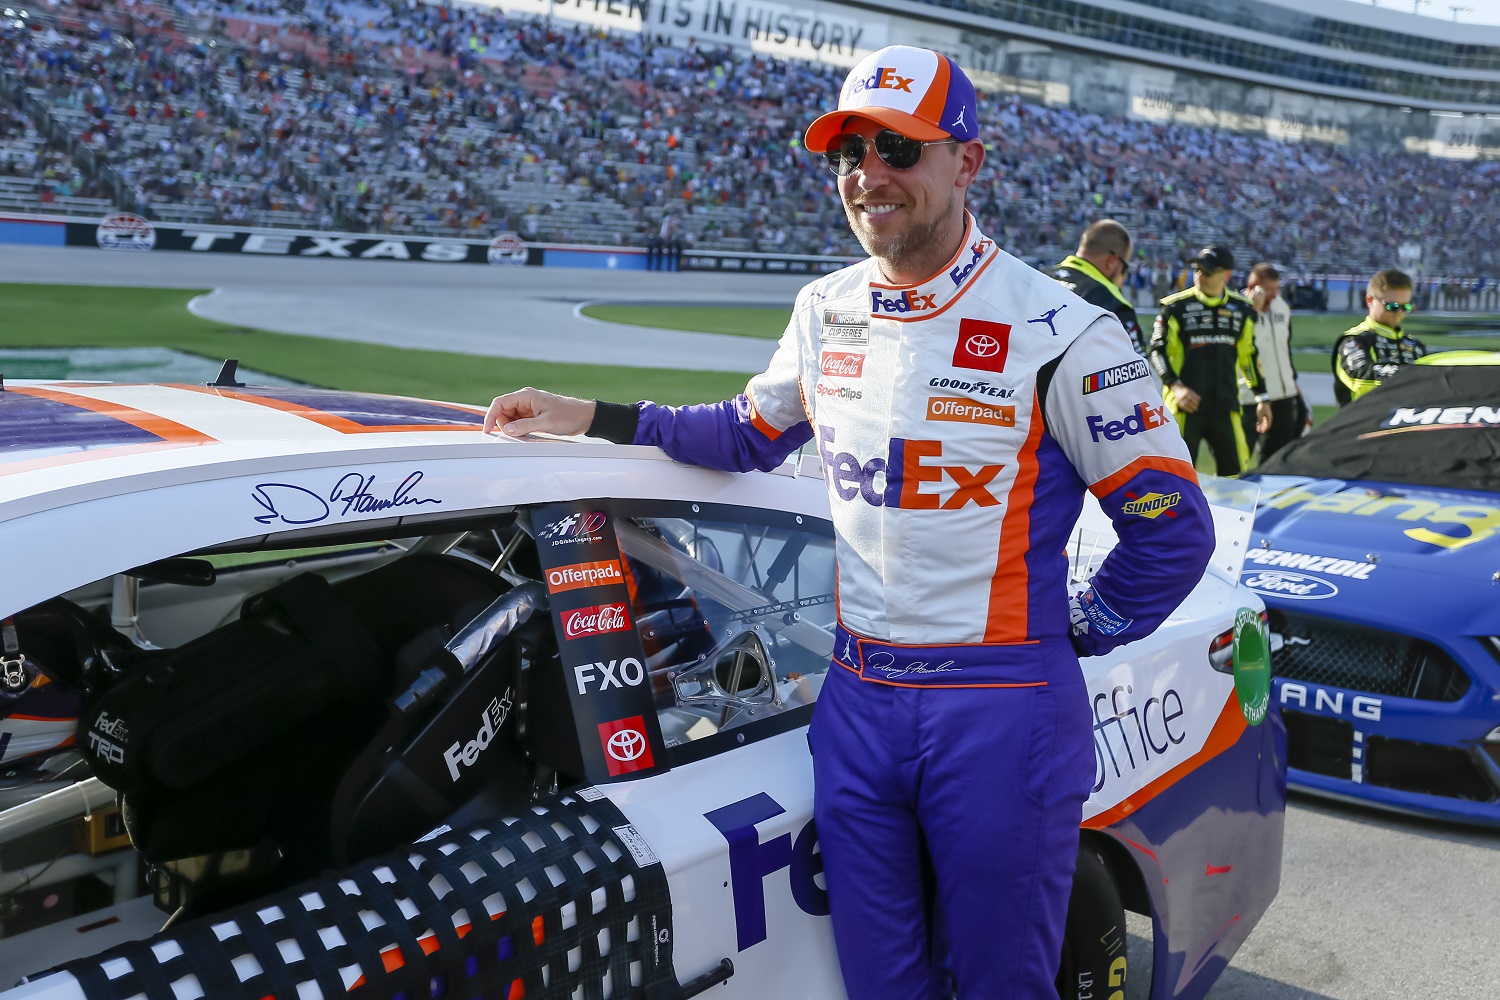 Denny Hamlin stands next to his car before the NASCAR Cup Series All-Star Race on June 13, 2021, at Texas Motor Speedway in Fort Worth, Texas. | Matthew Pearce/Icon Sportswire via Getty Images